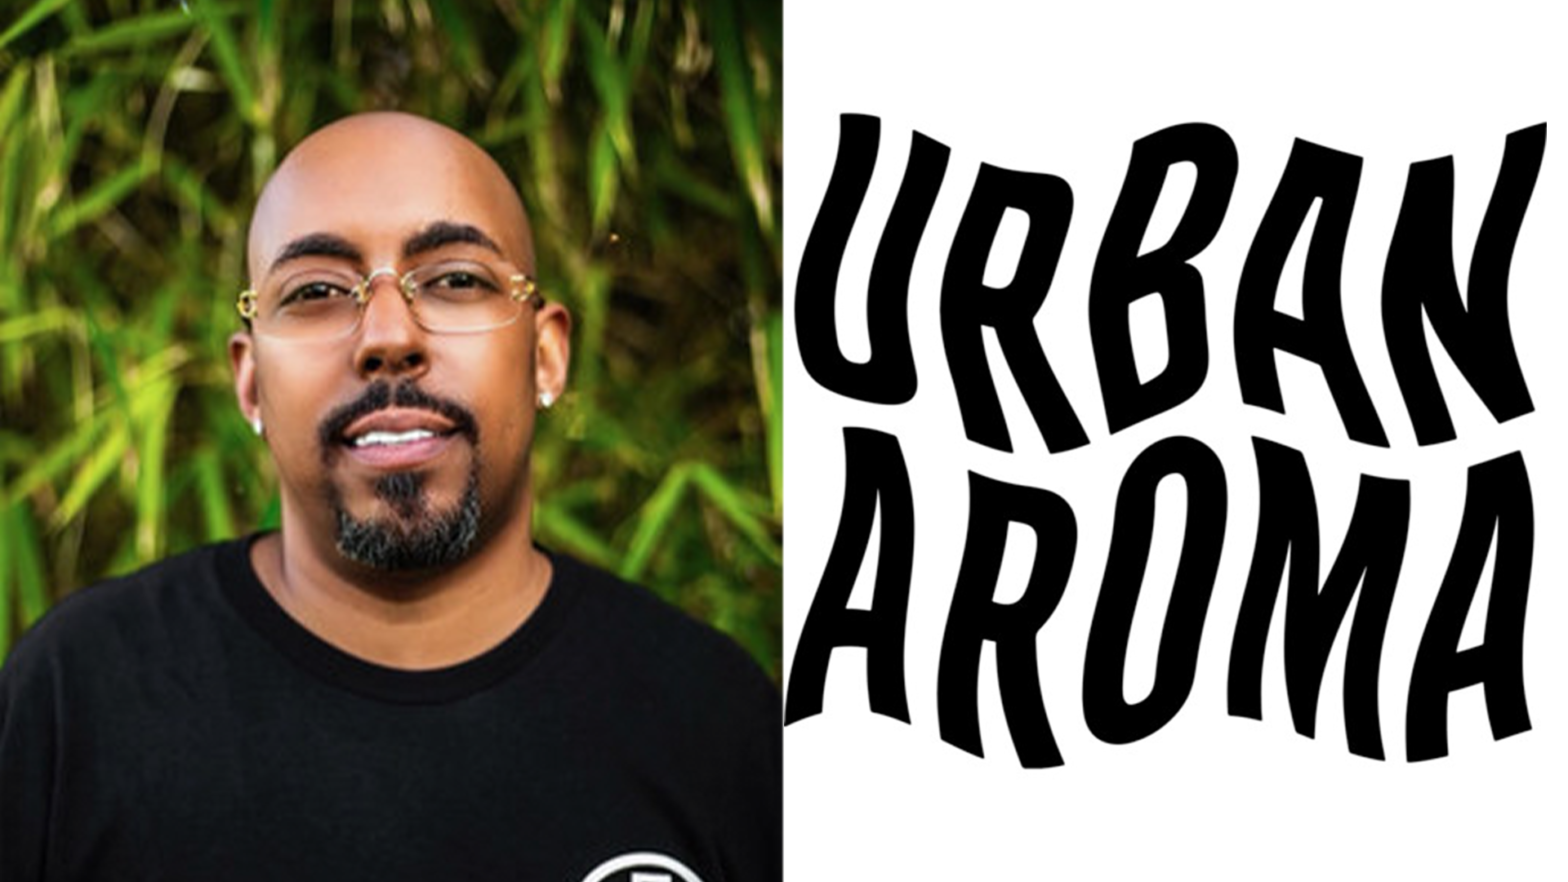 From Managing Kanye West To Leading A Cannabis Company: Urban Aroma Taps John Monopoly As CEO